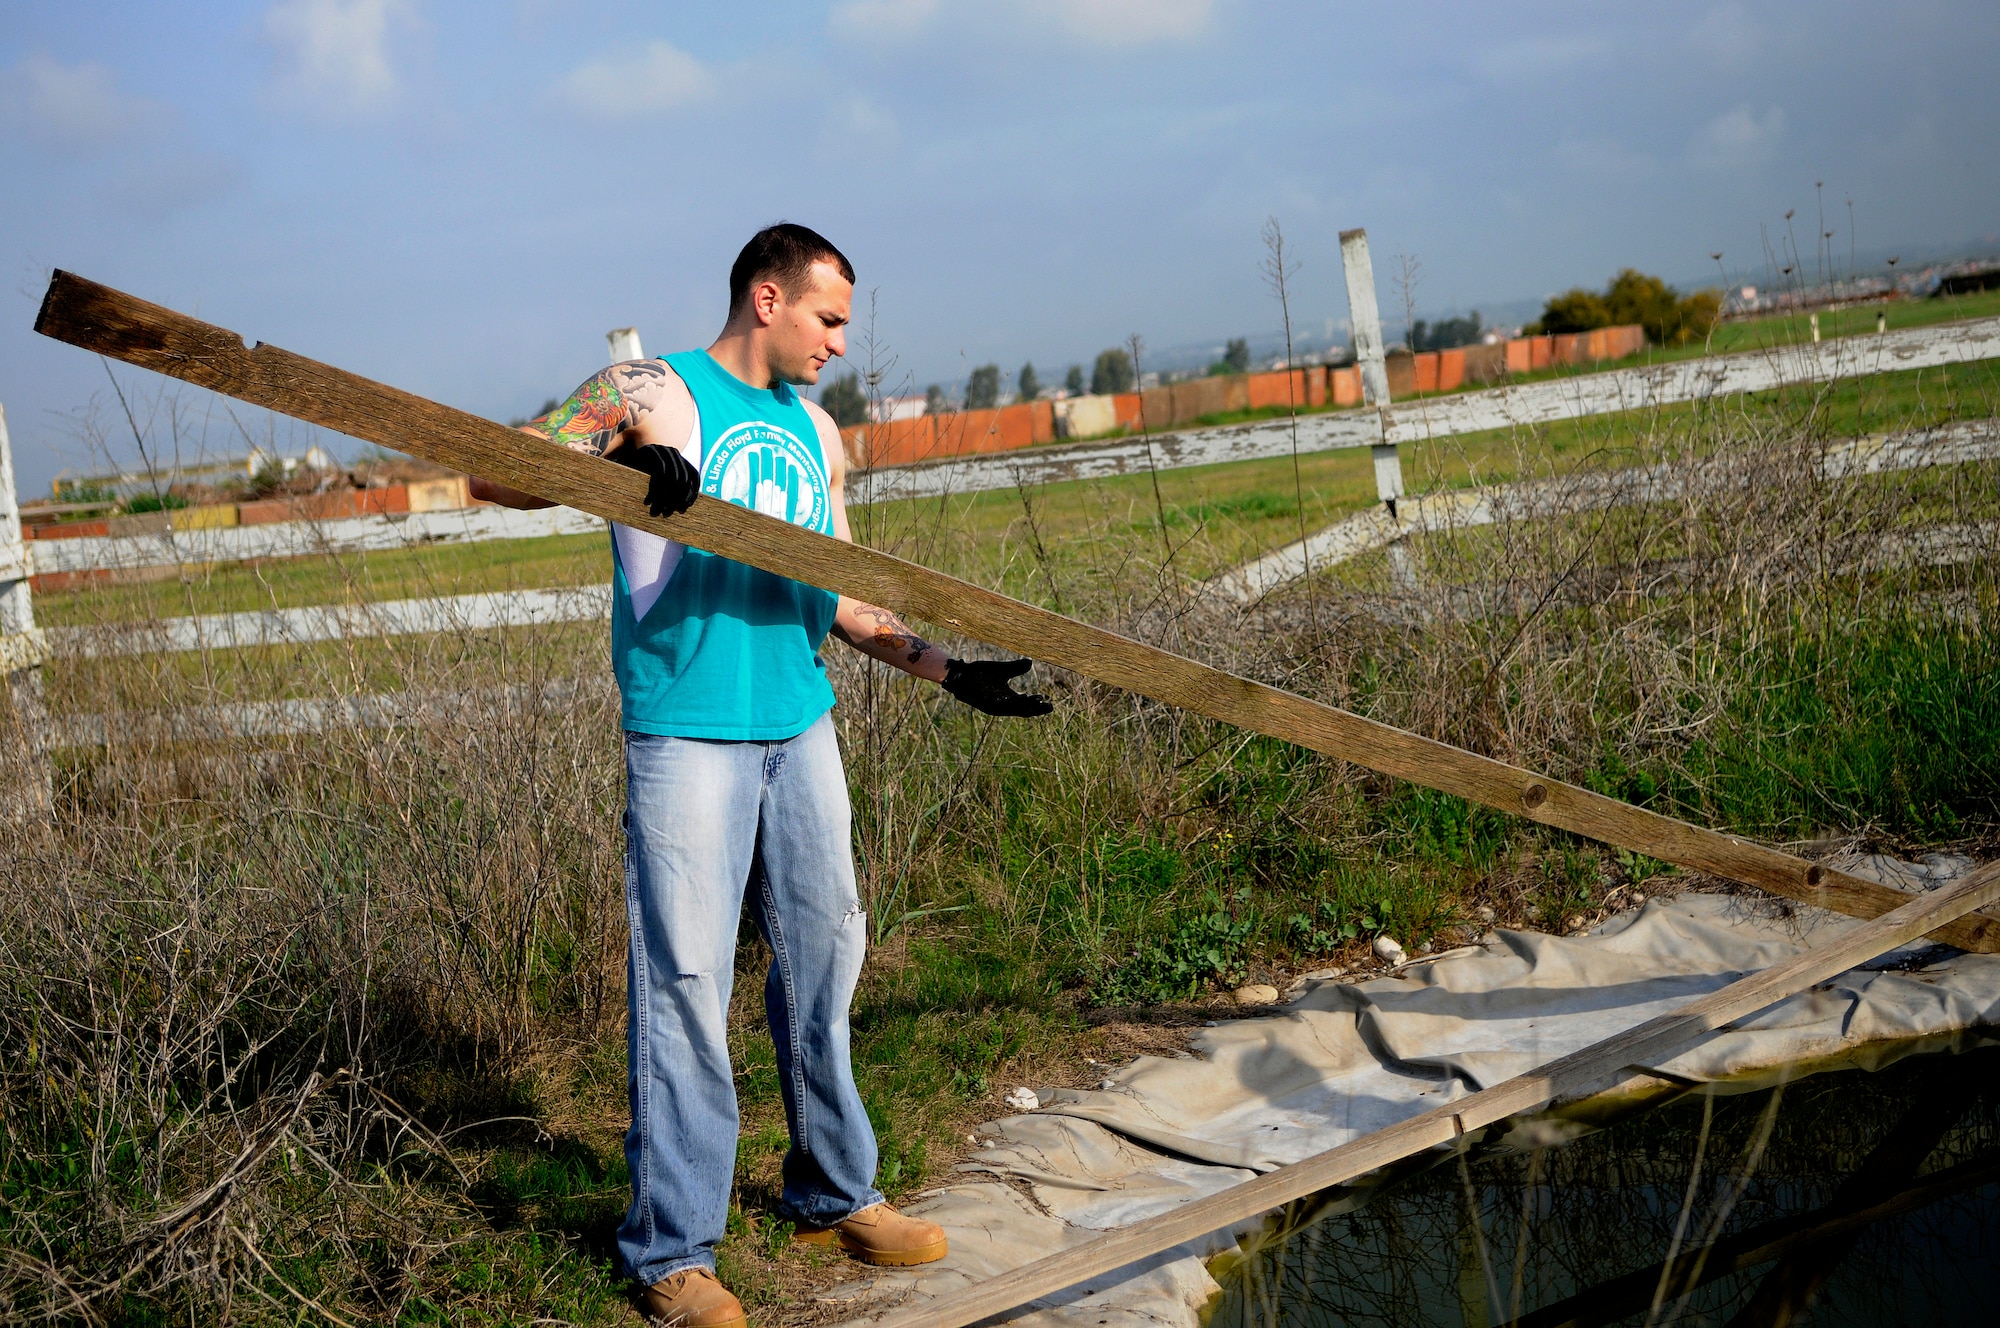 Staff Sgt. Kevin Kirk, 39th Logistics Readiness Squadron, removes fence boards from a pond at the base dog park April 21, 2012, at Incirlik Air Base, Turkey. Twelve volunteers spent five hours gathering trash and debris, mending fences, and mowing to provide a place for the base's furry residents to play. (U.S. Air Force photo by Staff Sgt. Kali L. Gradishar/Released)